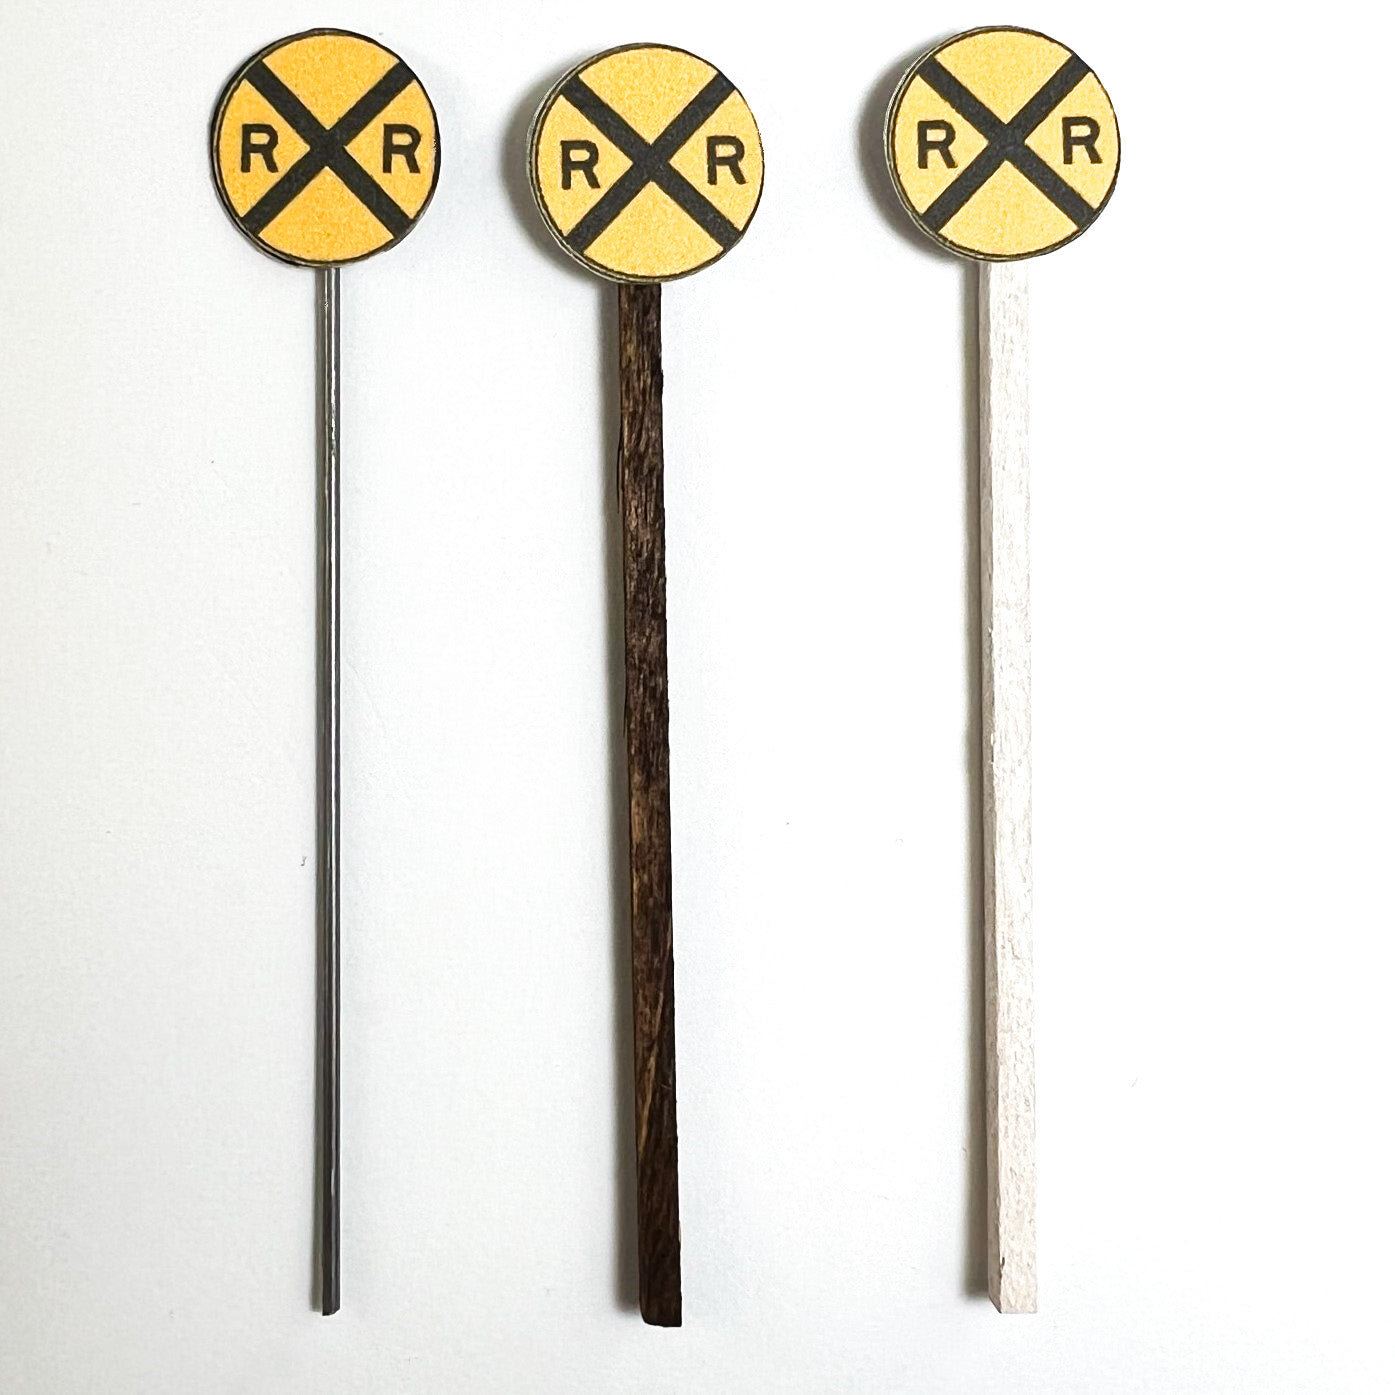 Model Railroad Grade Crossing Advance Warning Sign. Yellow circle, R X R Metal pole, white or brown wood post. HO Gauge, HO Scale